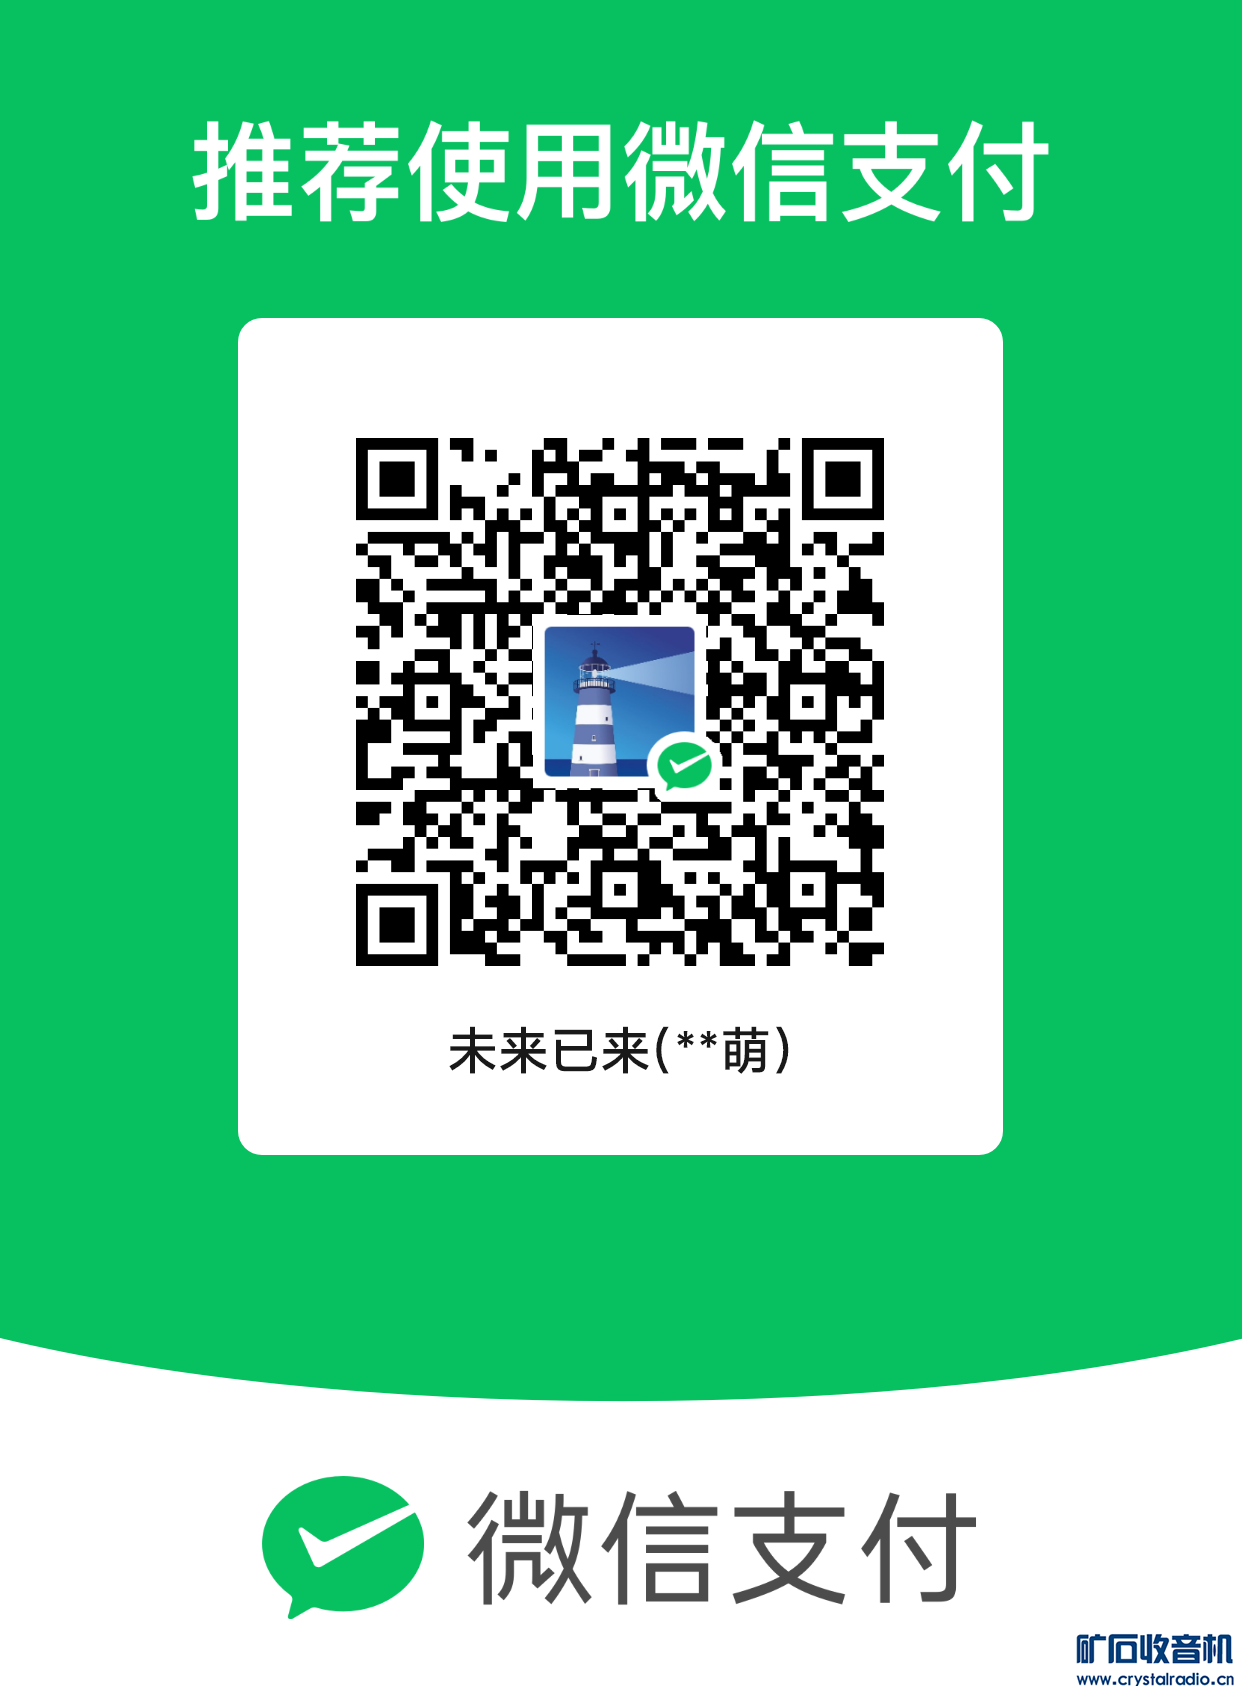 mm_facetoface_collect_qrcode_1656764026779.png